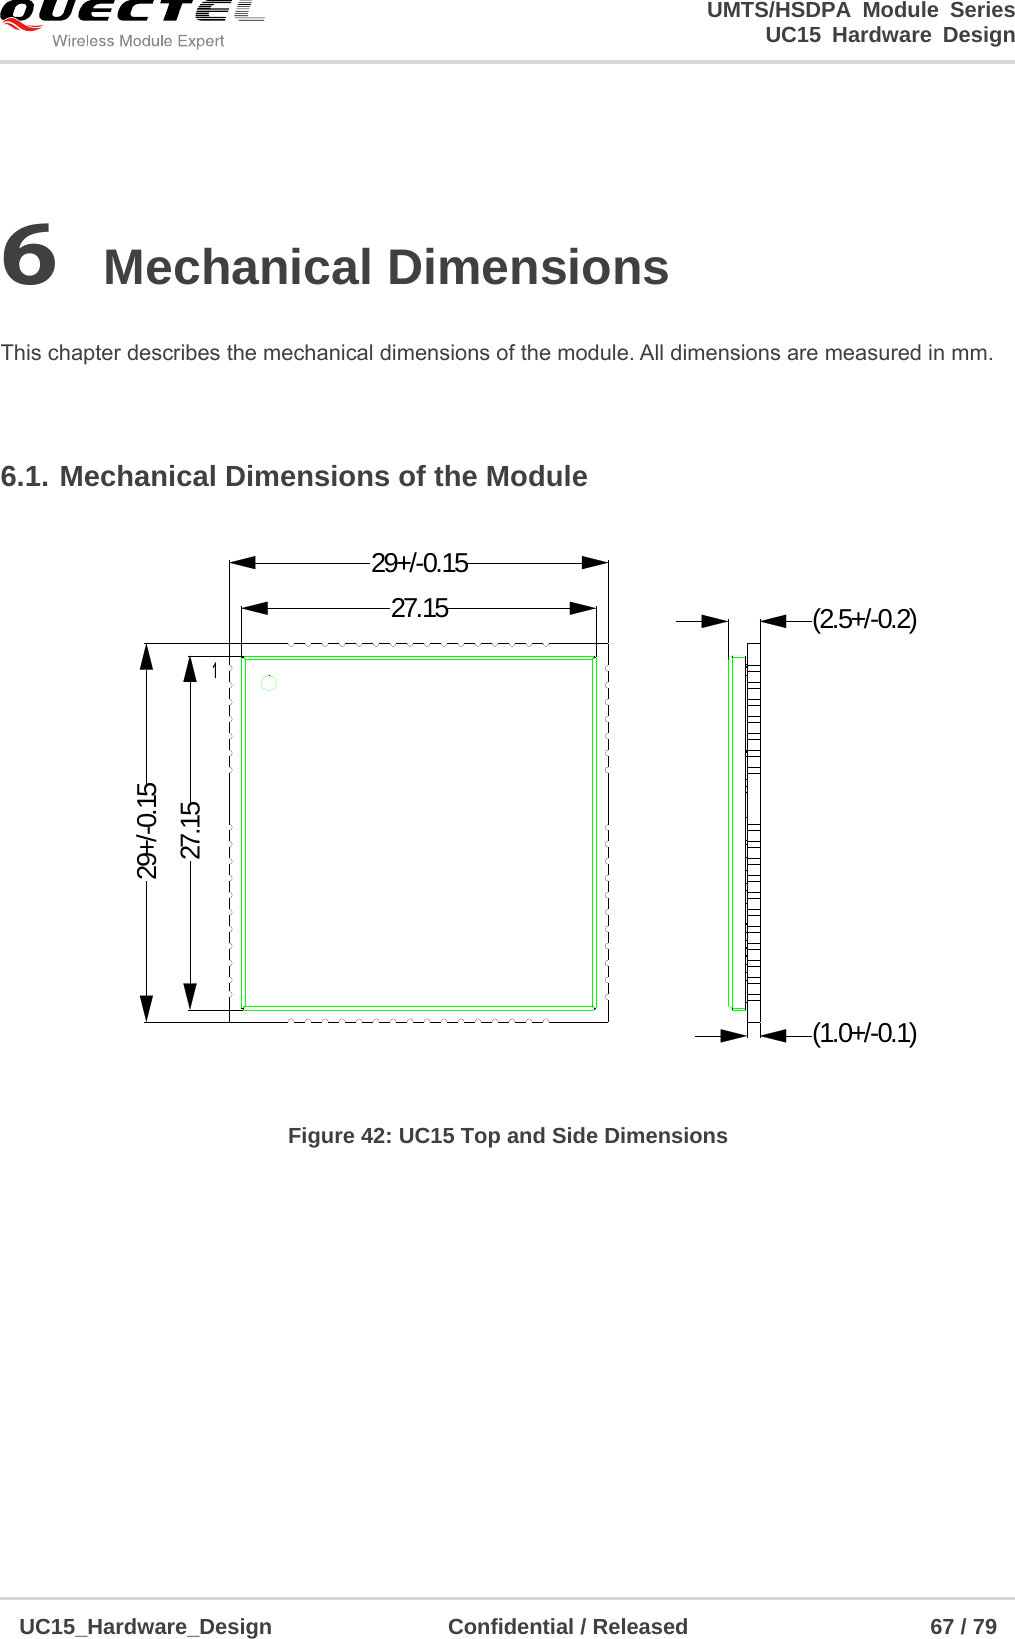                                                                        UMTS/HSDPA Module Series                                                                 UC15 Hardware Design  UC15_Hardware_Design                Confidential / Released                      67 / 79    6 Mechanical Dimensions  This chapter describes the mechanical dimensions of the module. All dimensions are measured in mm.  6.1. Mechanical Dimensions of the Module (2.5+/-0.2)(1.0+/-0.1)27.1527.1529+/-0.1529+/-0.15 Figure 42: UC15 Top and Side Dimensions         